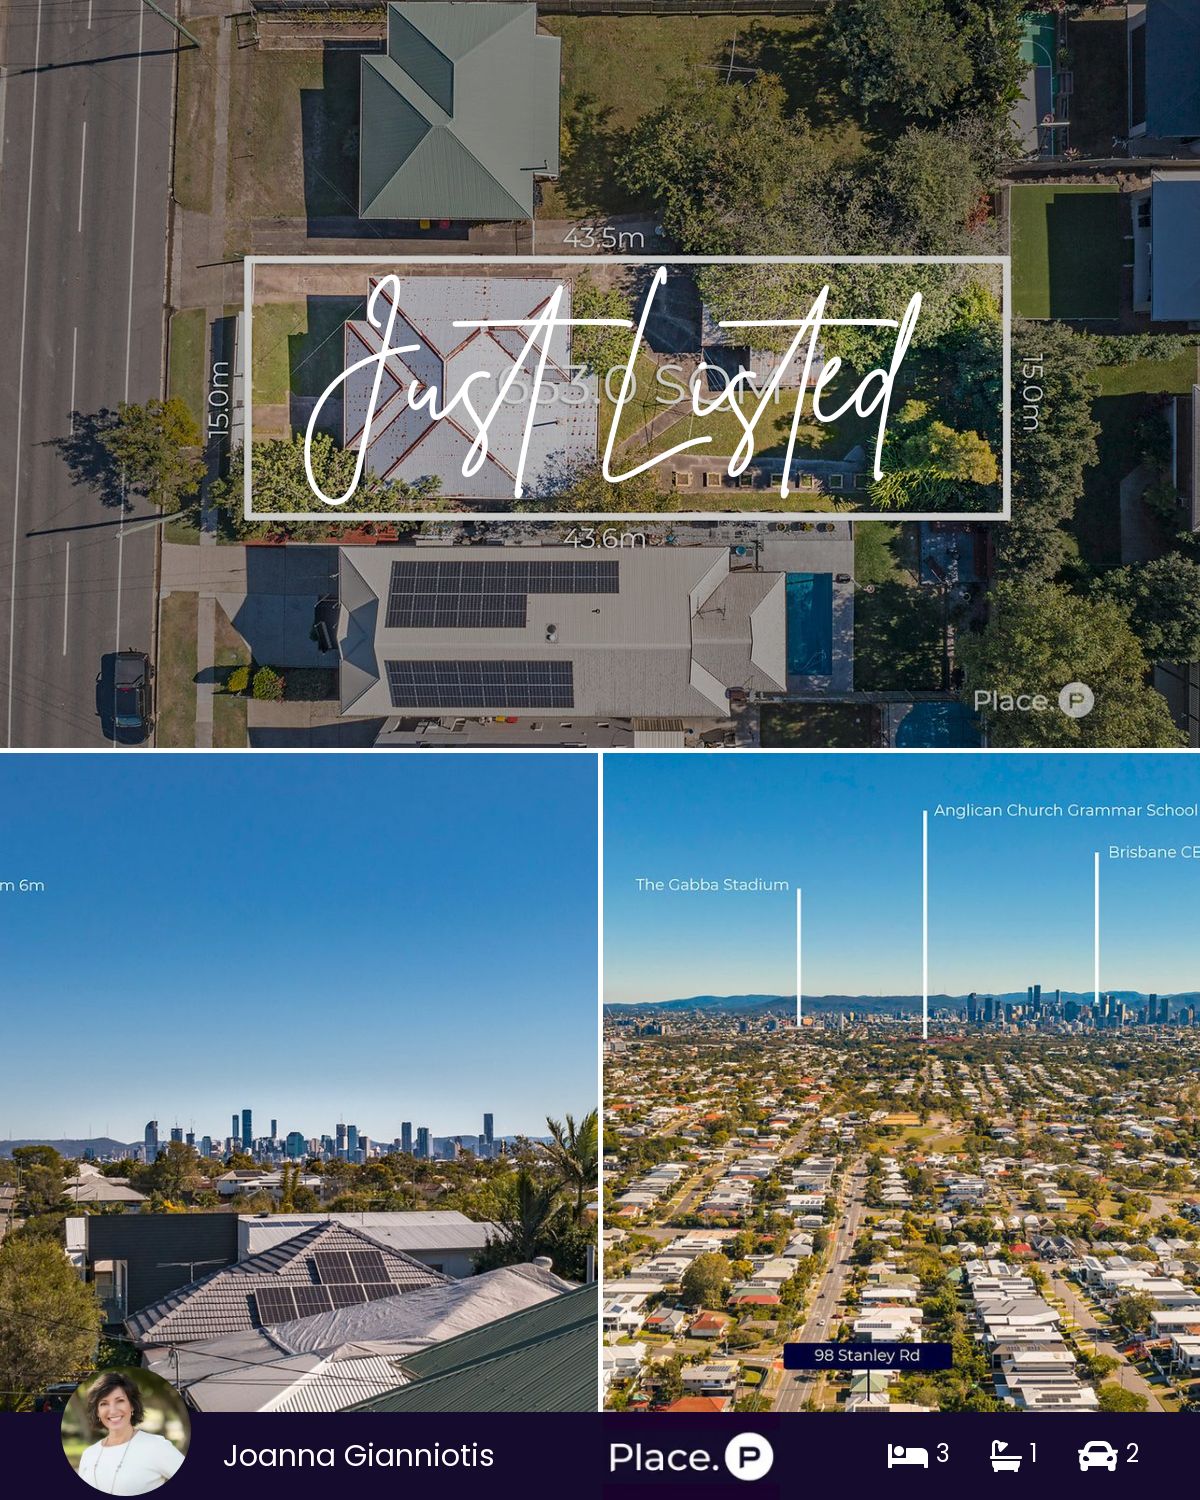 98 Stanley Road, Camp Hill, QLD 4152 | Realty.com.au